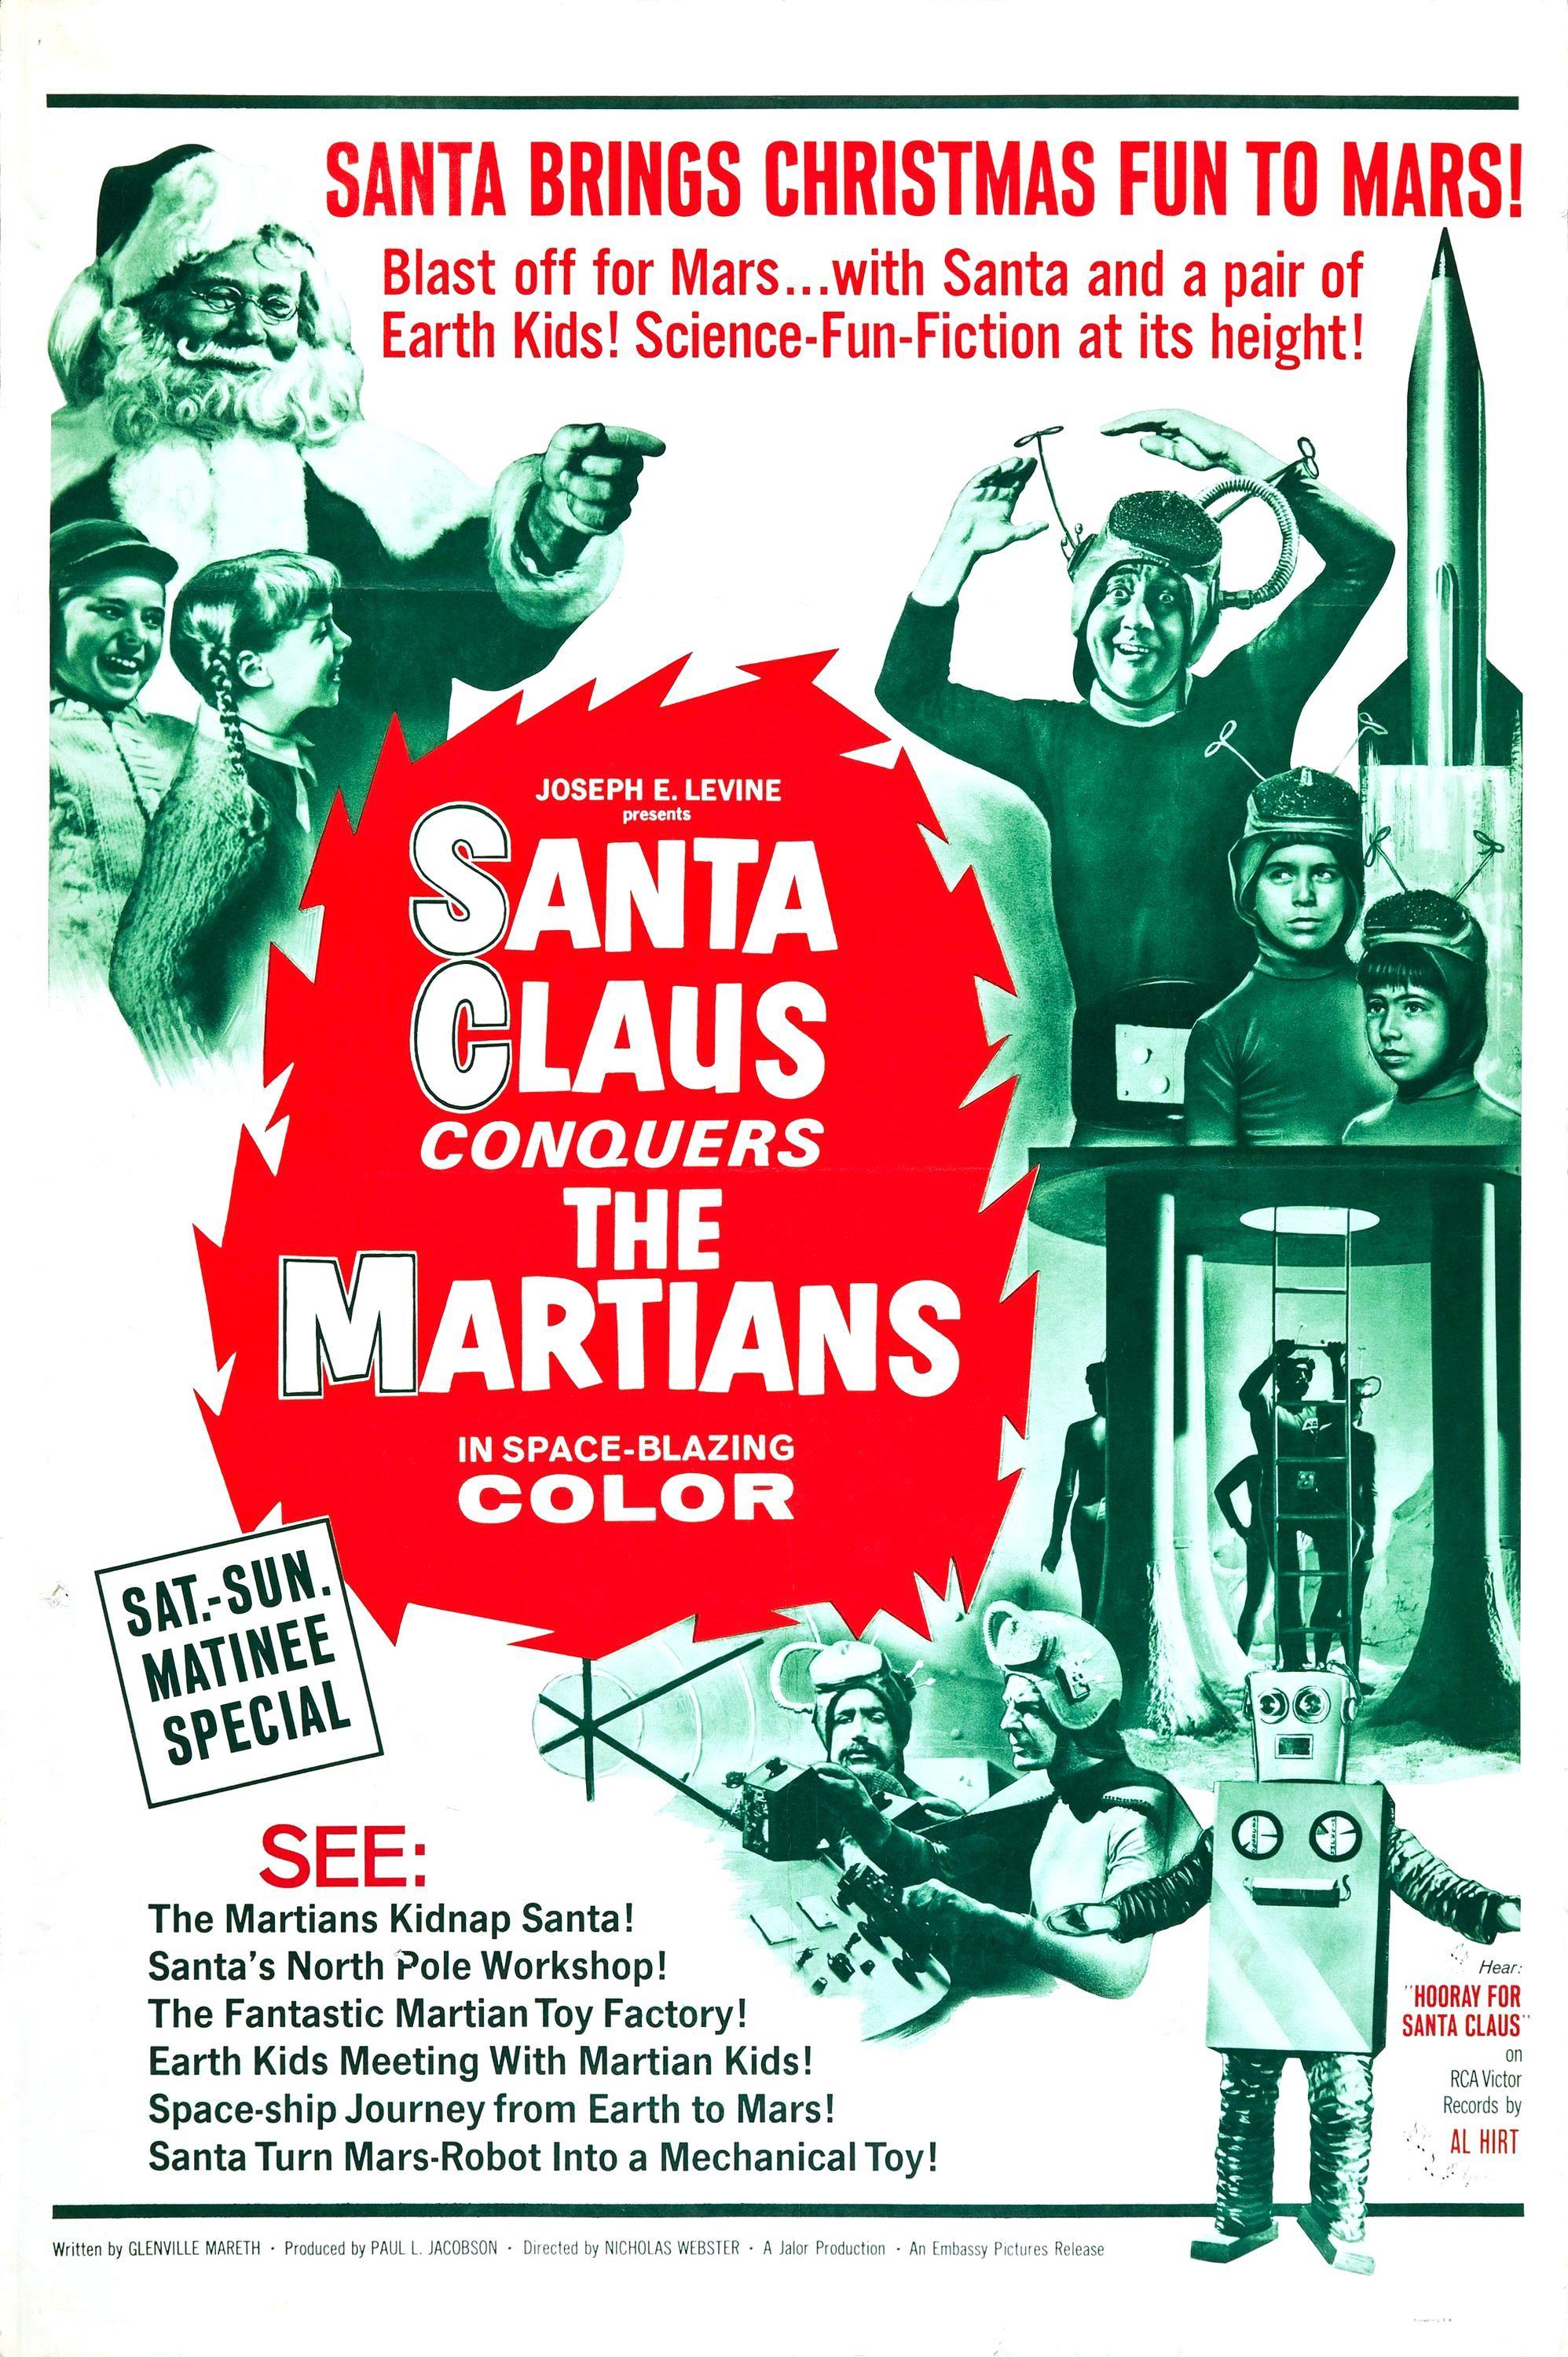 santa claus and the martians - Santa Brings Christmas Fun To Mars! Blast off for Mars...with Santa and a pair of Earth Kids! ScienceFunFiction at its height! Santa Claus Conquers The Martians In SpaceBlazing Color SatSun. Matinee Special See The Martians 